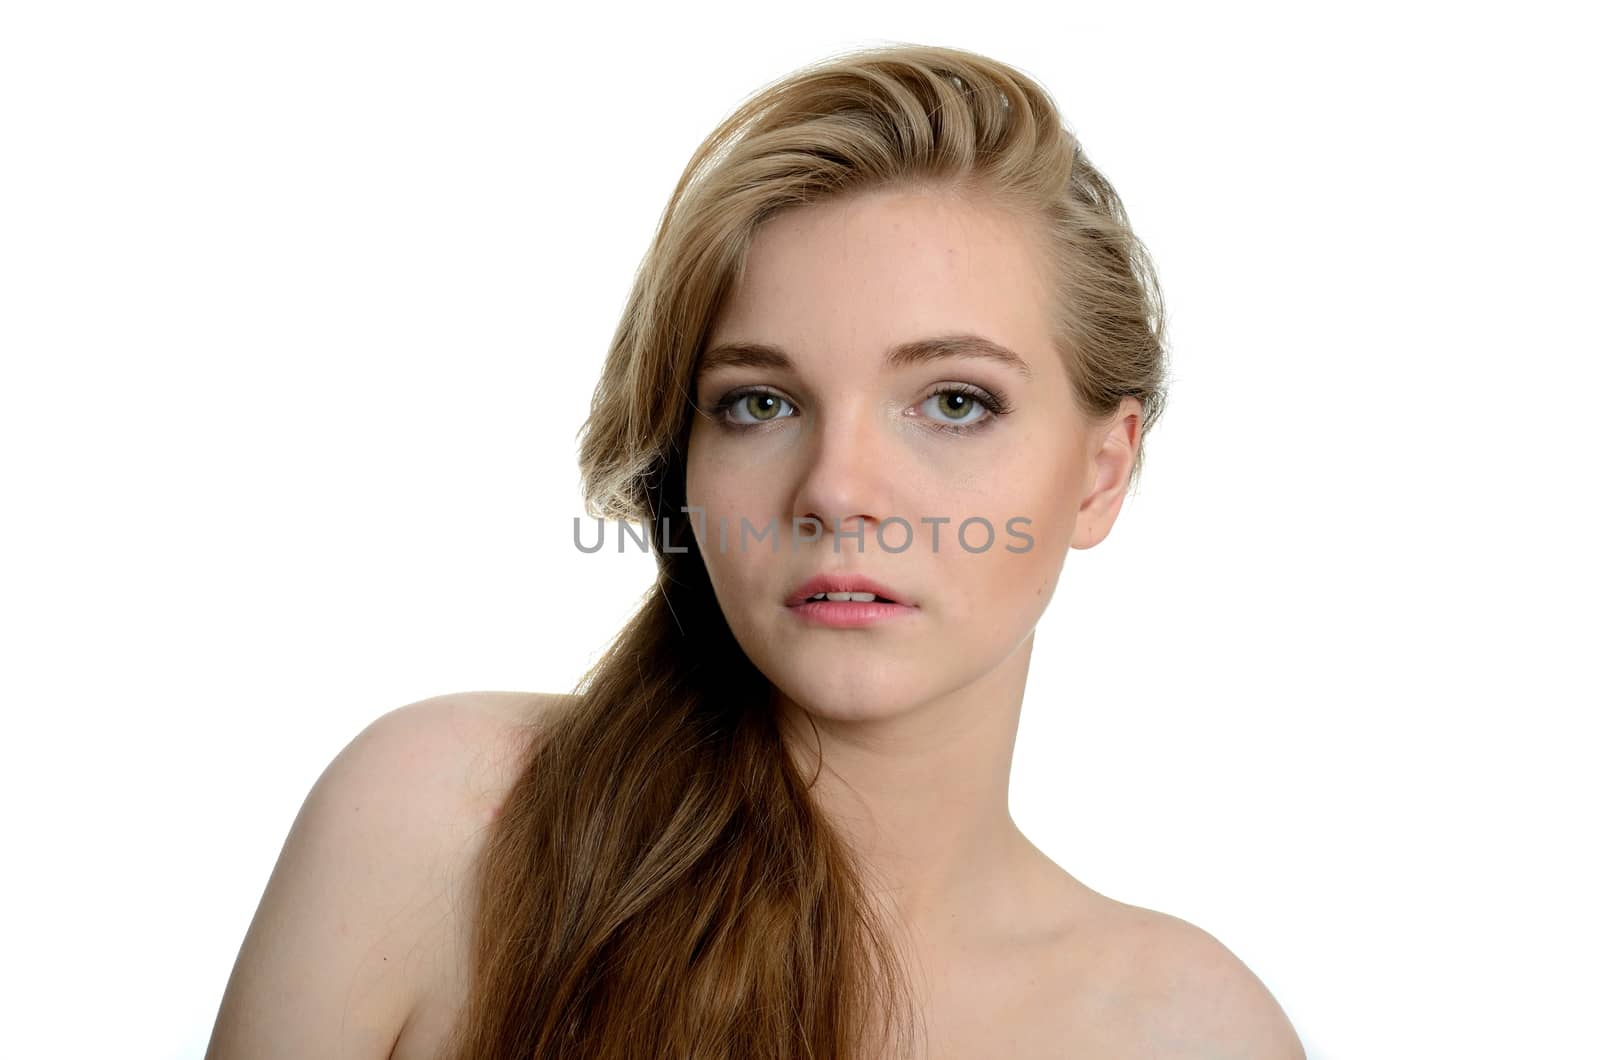 Young girl with kind and soft face expression. Portrait of female model with blond hairs.